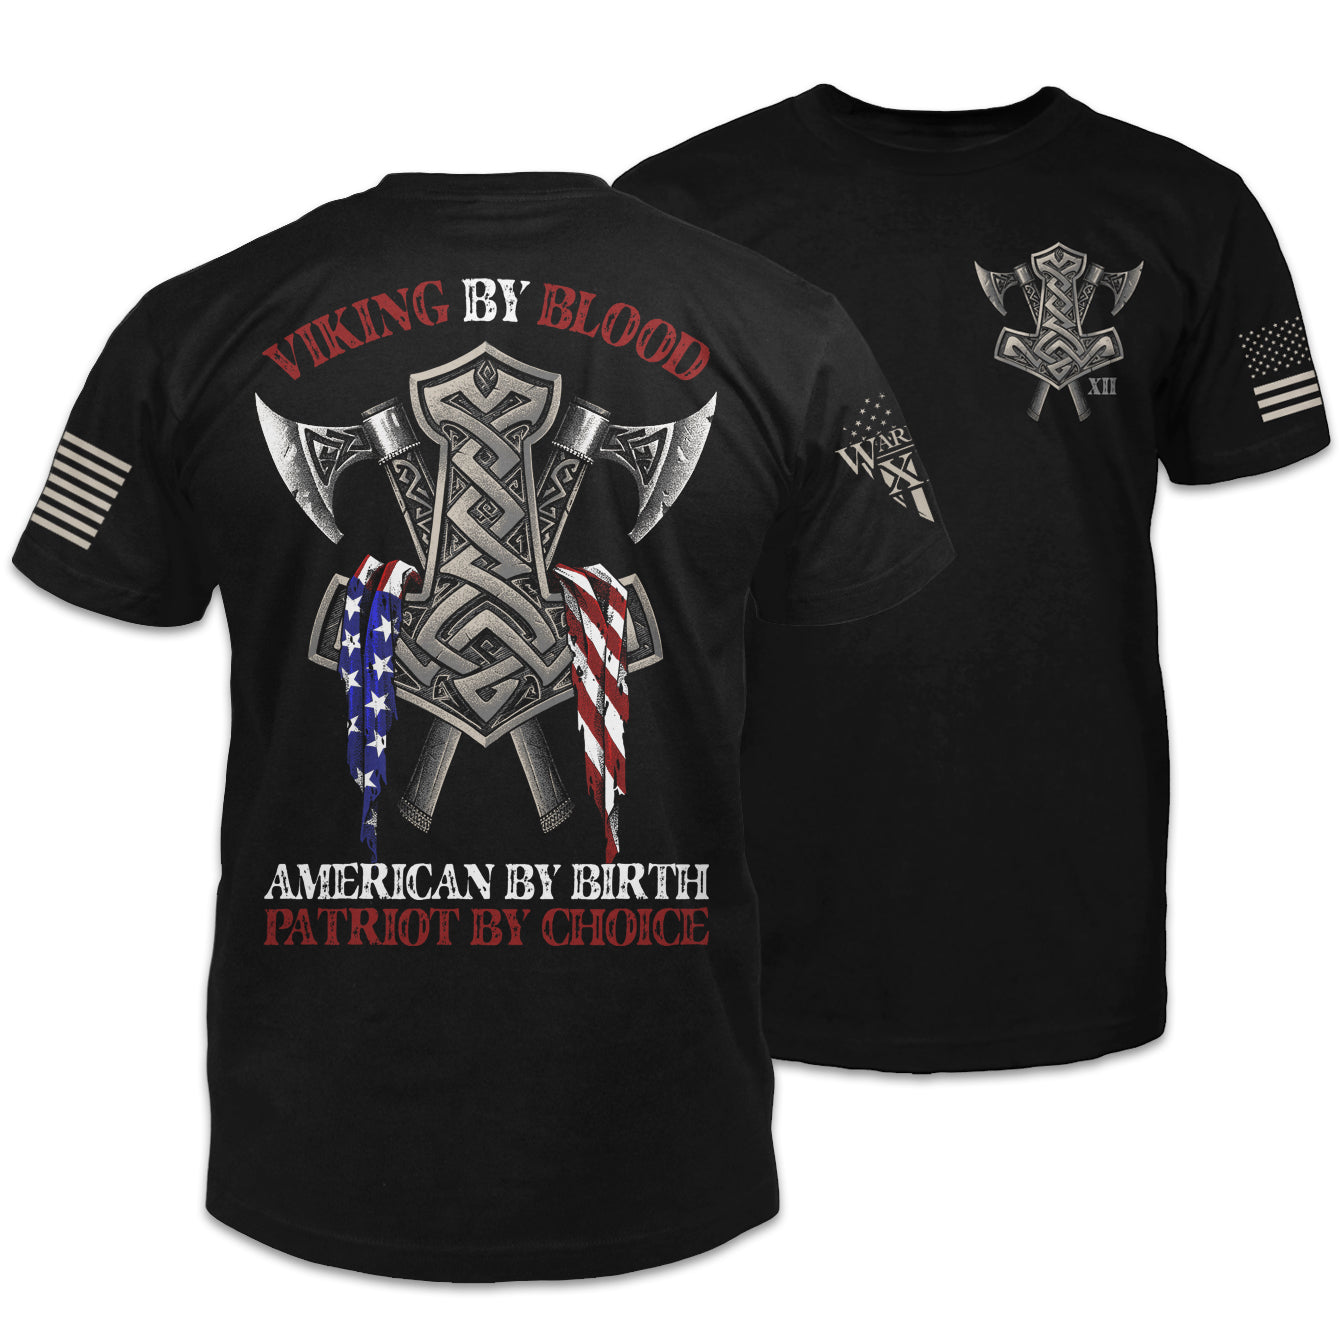 Front & back black t-shirt with the words "Viking by blood, American by birth, patriot by choice" with viking axes printed and an American flag printed on the shirt.